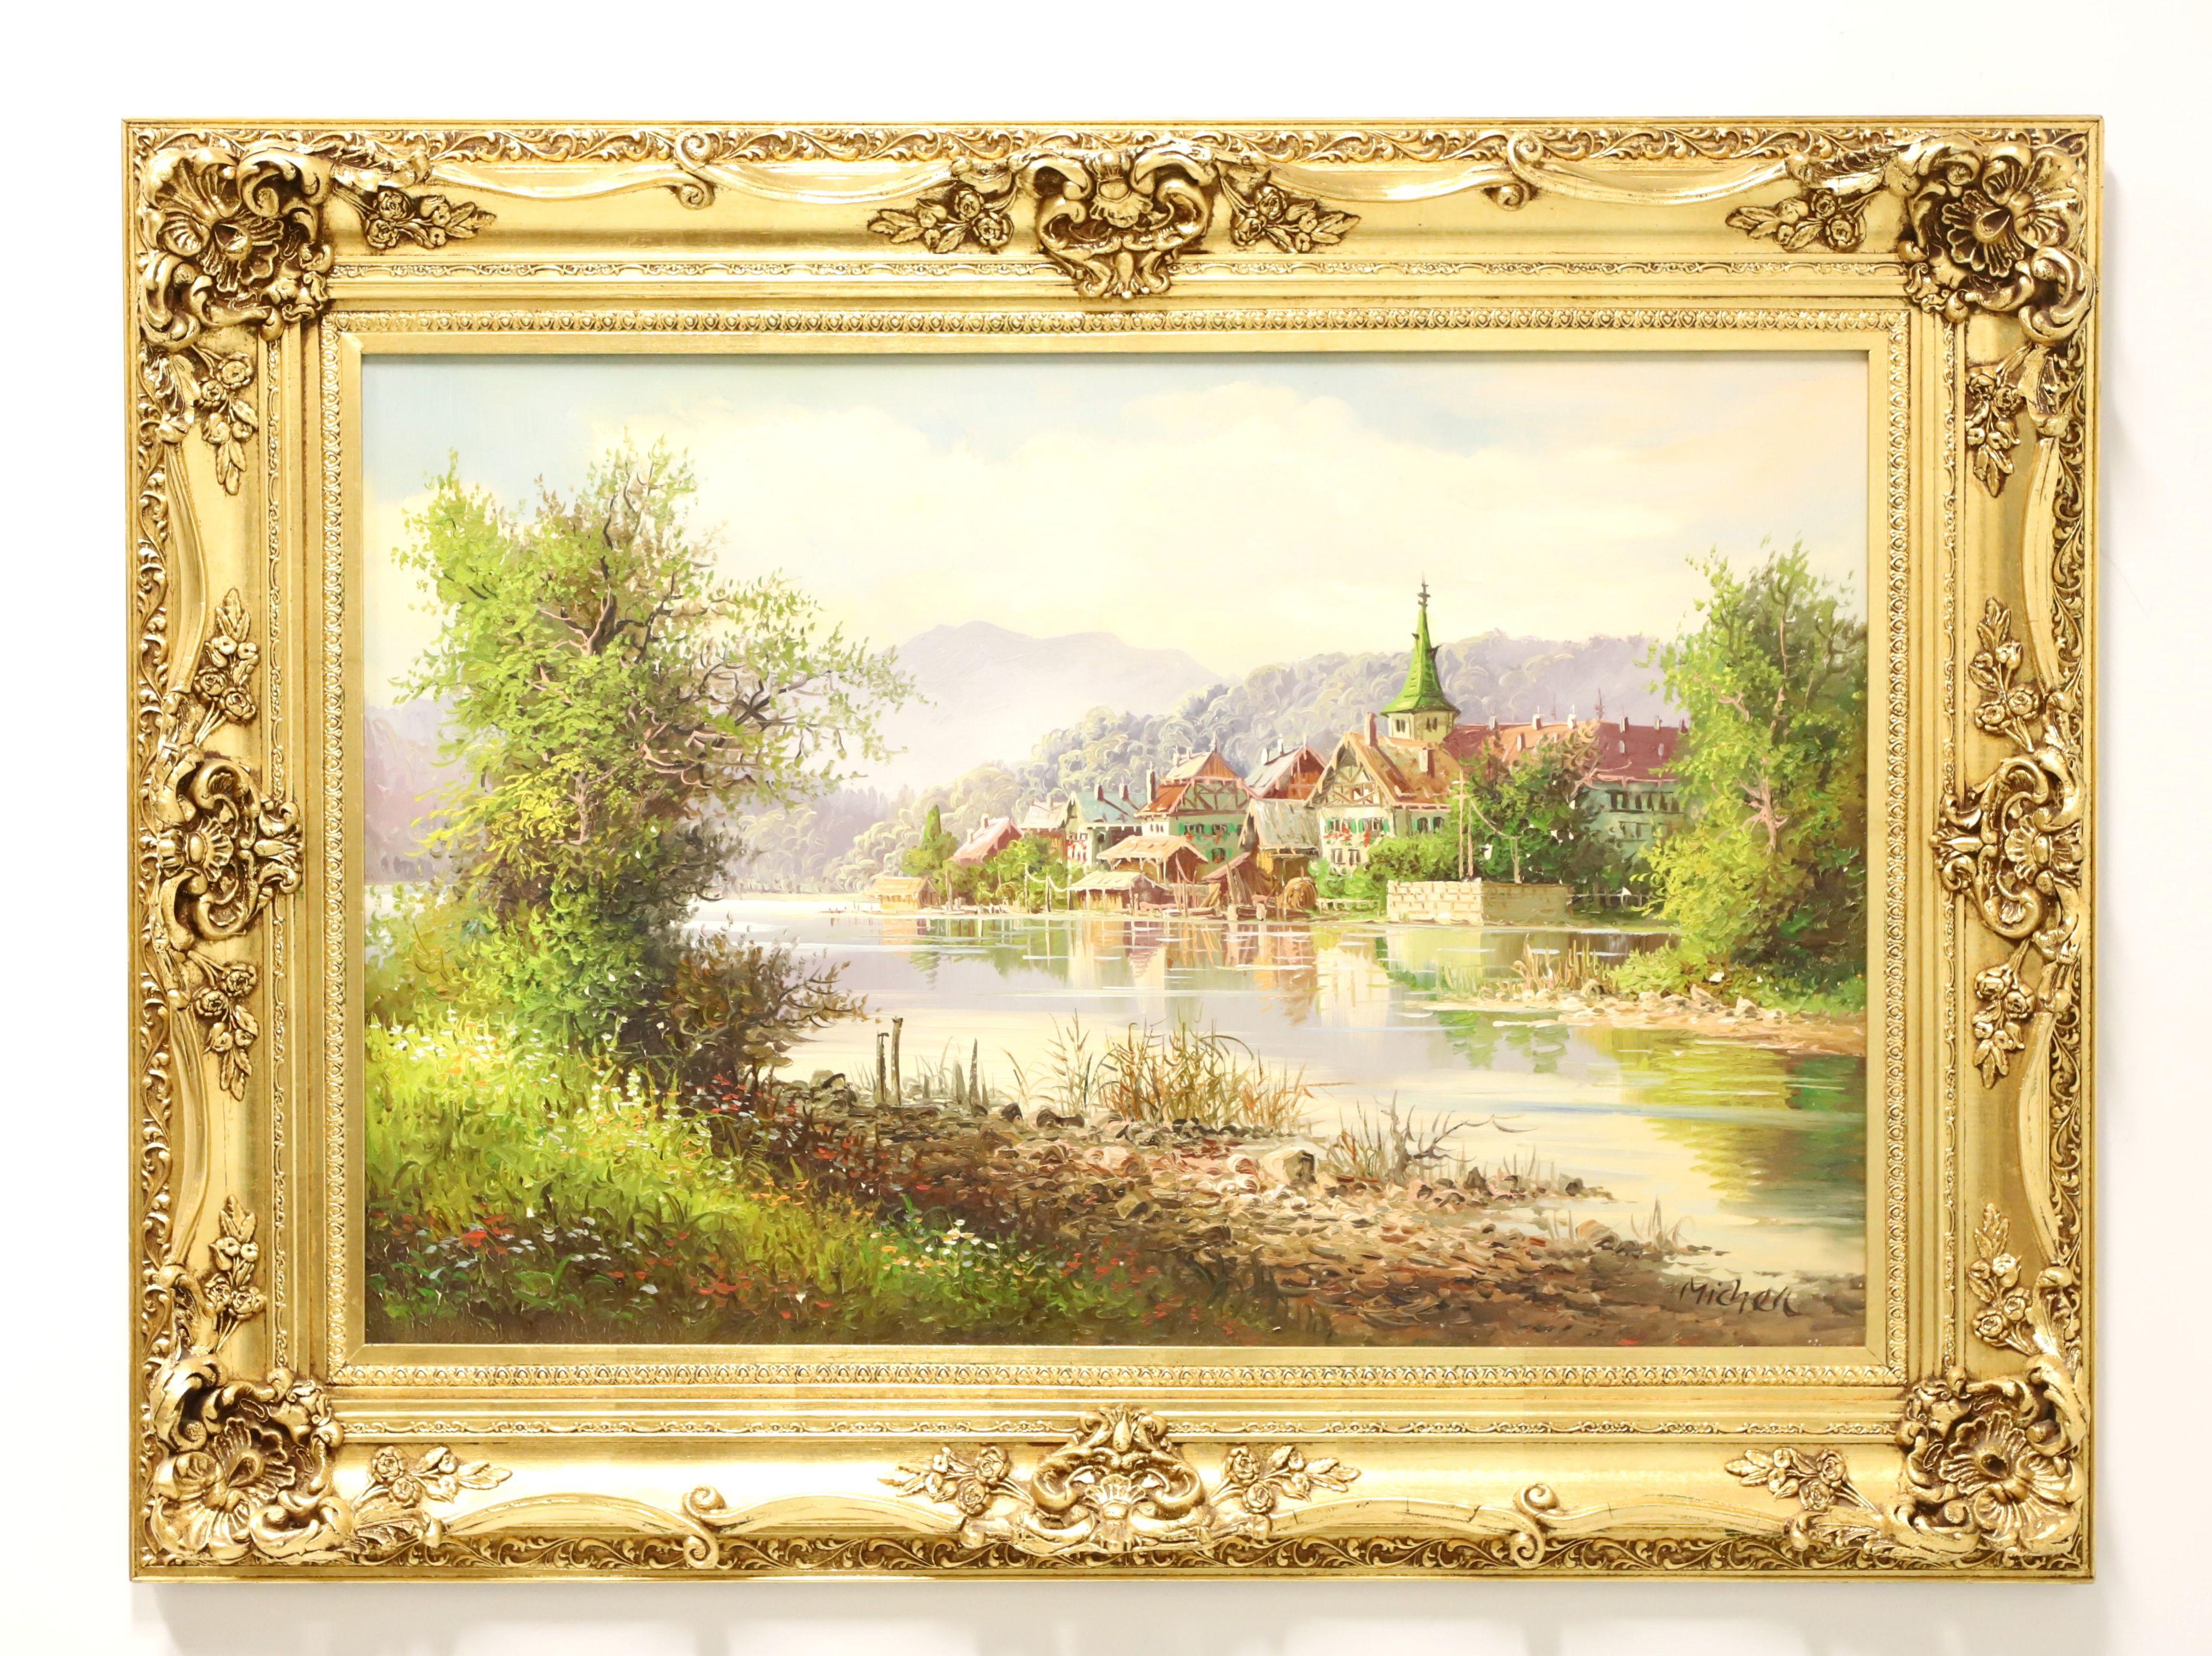 20th Century Original Oil Painting on Canvas - German Landscape - Signed Michell For Sale 6